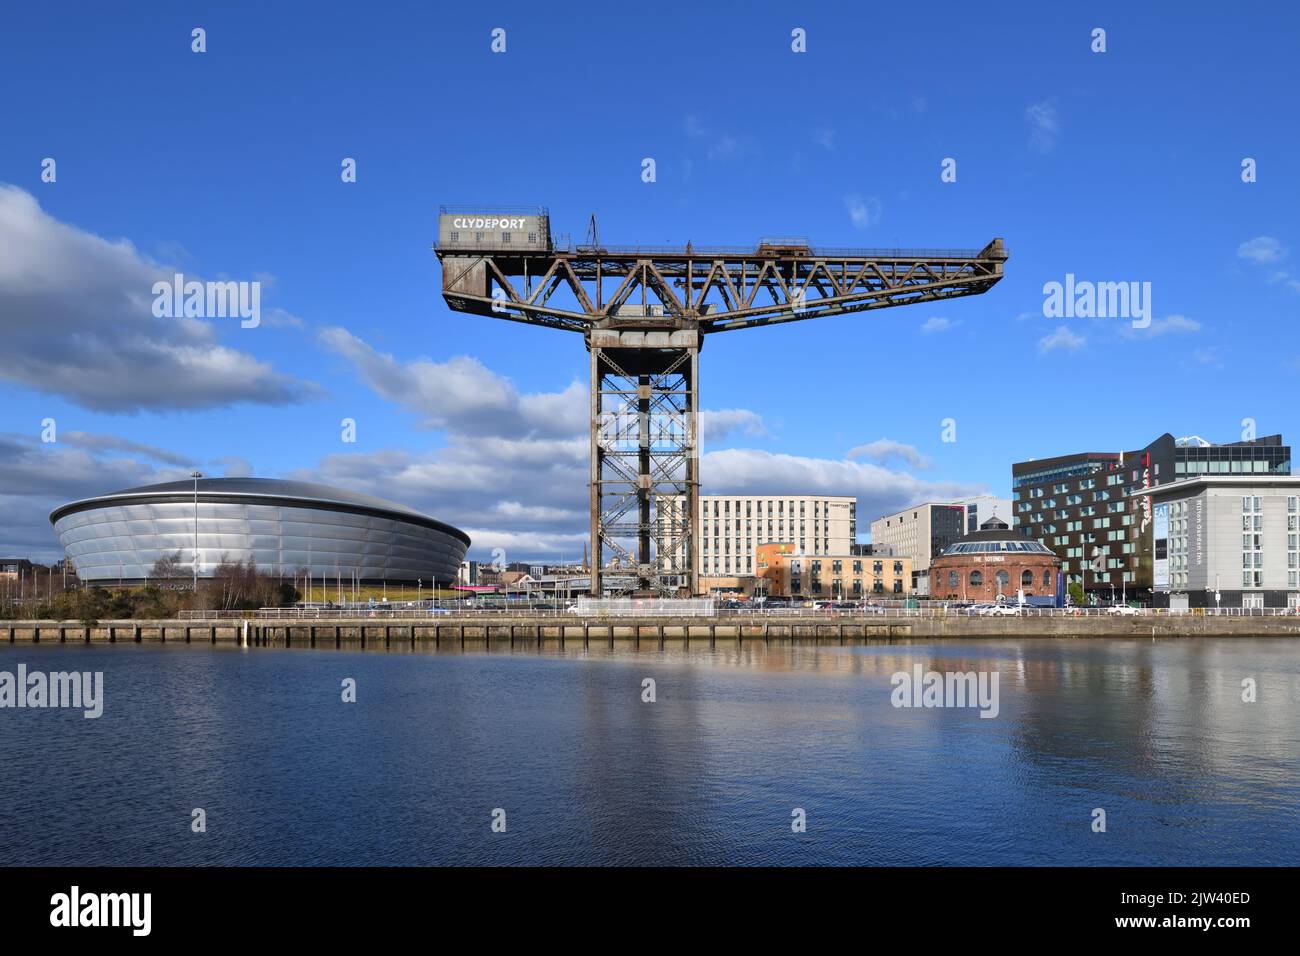 The OVO Hydro, Scottish Event Campus, Finnieston crane and Rotunda viewed from the opposite bank of the river Clyde in Glasgow, Scotland, UK Stock Photo